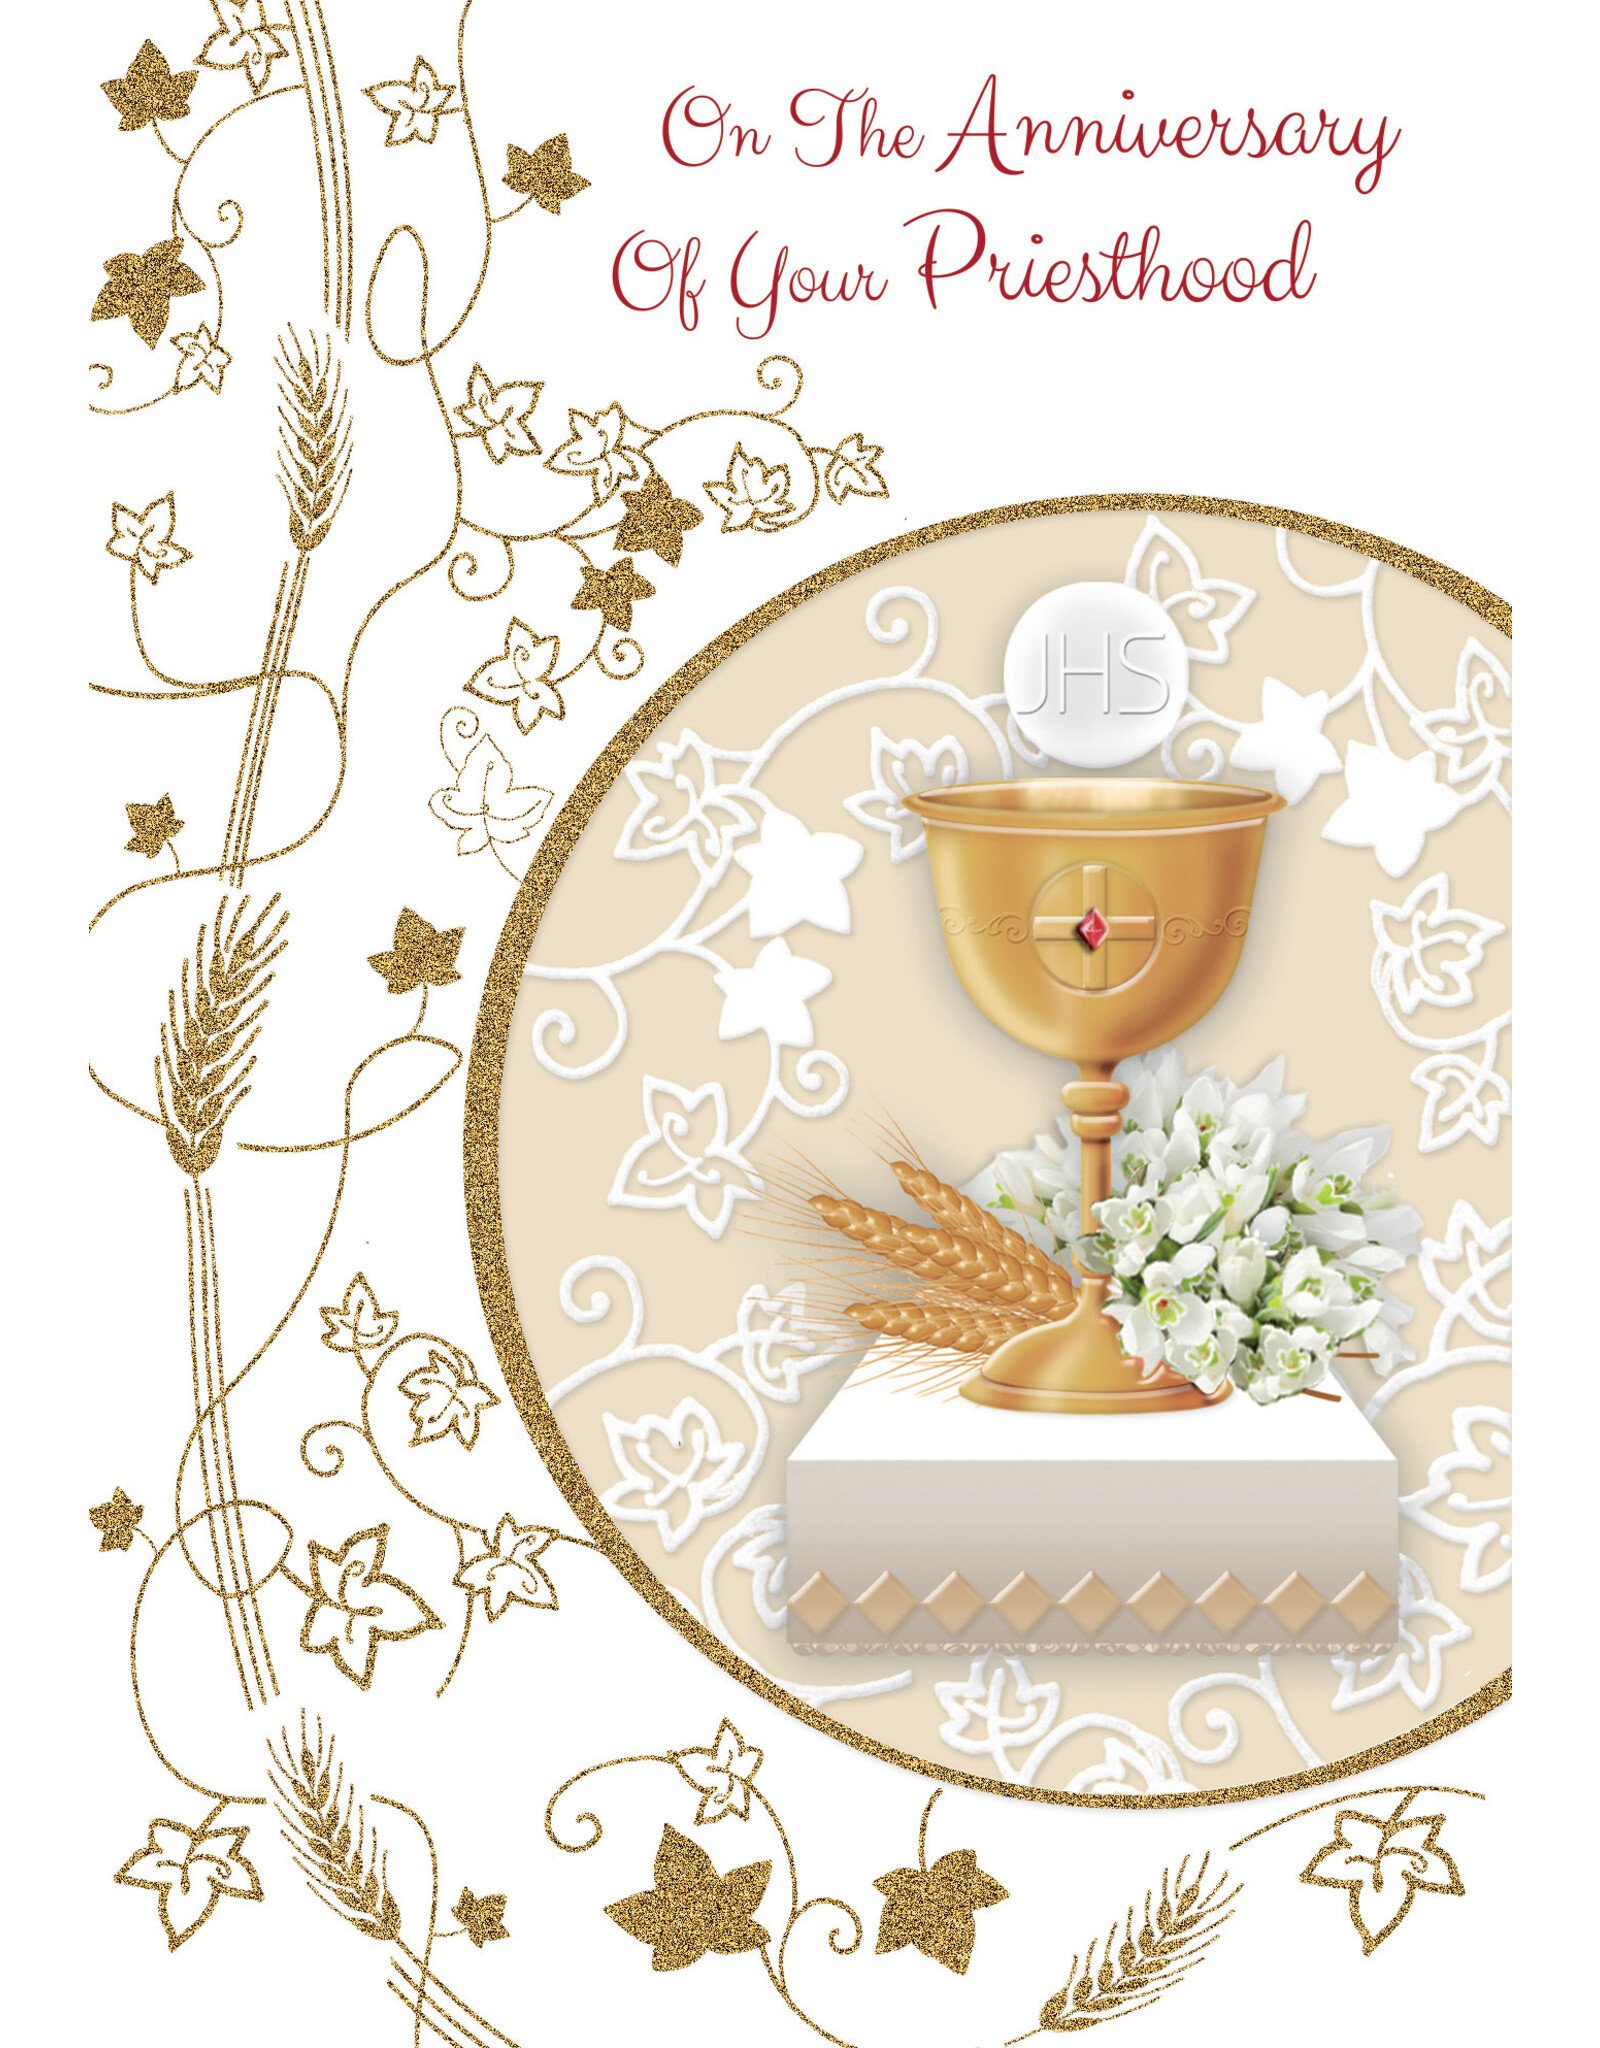 Greetings of Faith Card - Priest Ordination Anniversary - Gold Foil / Embossed